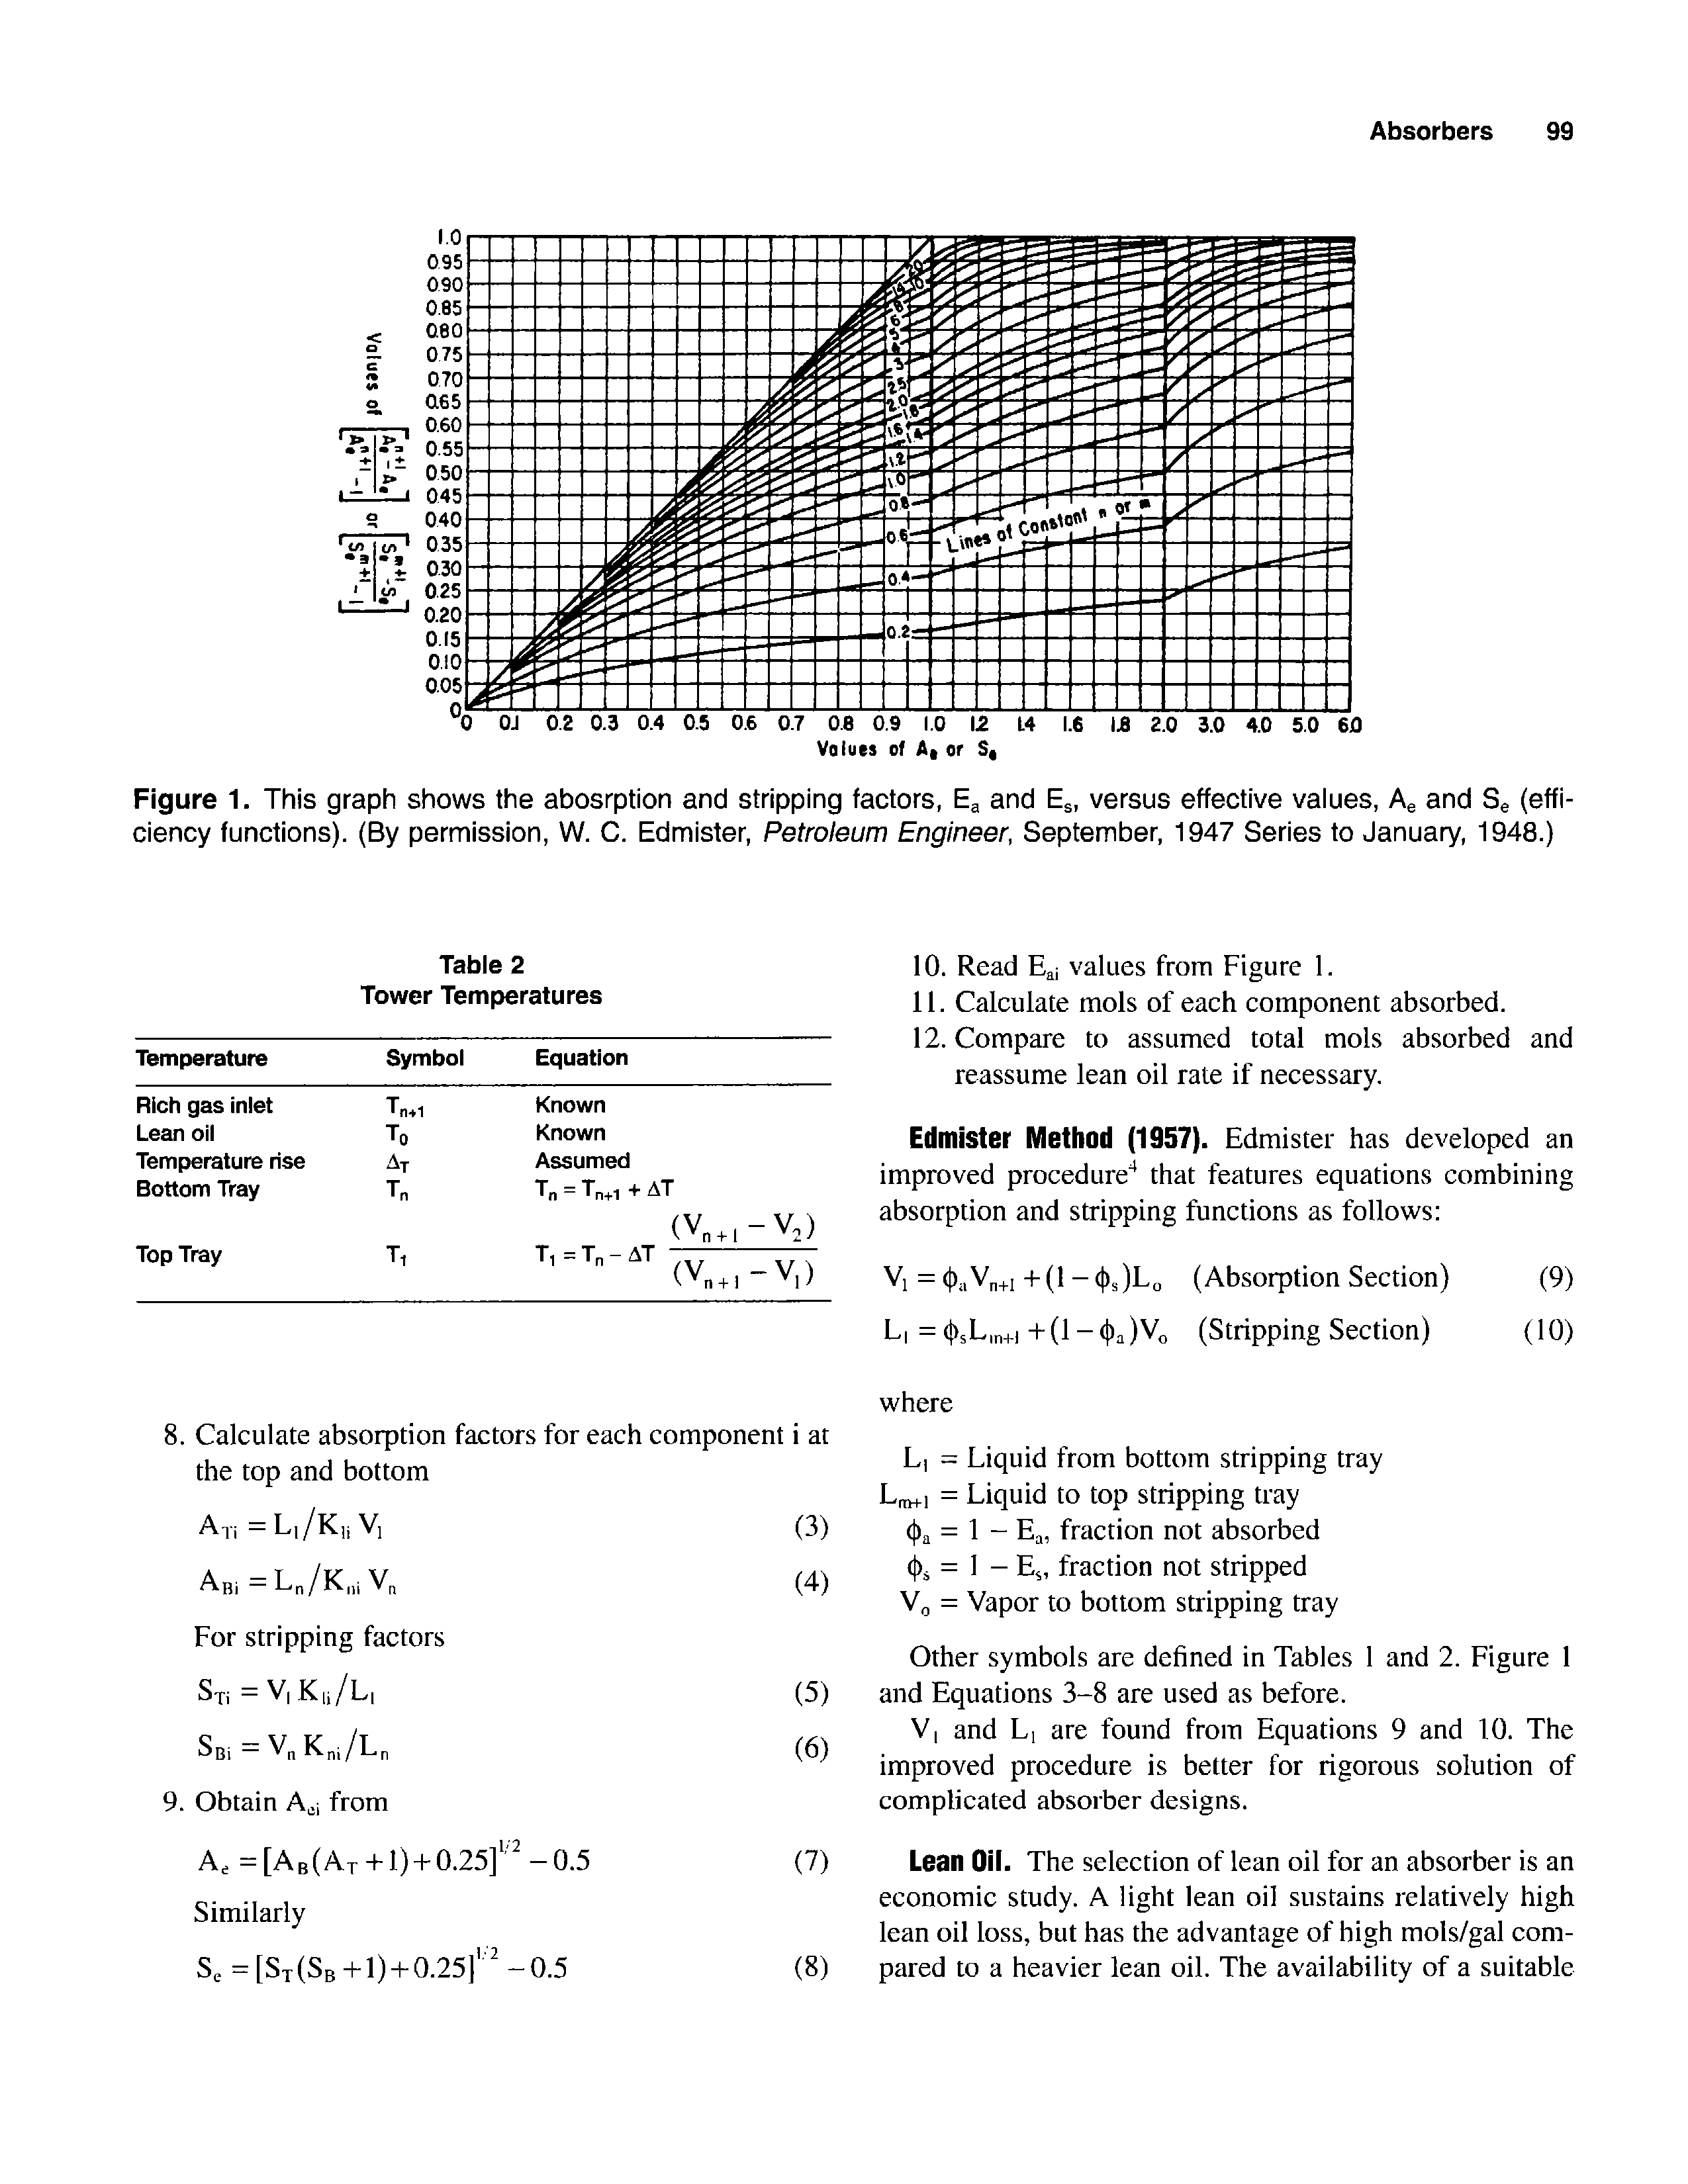 Figure 1. This graph shows the abosrption and stripping factors, Eg and E, versus effective values, Ae and Se (efficiency functions). (By permission, W. C. Edmister, Petroleum Engineer, September, 1947 Series to January, 1948.)...